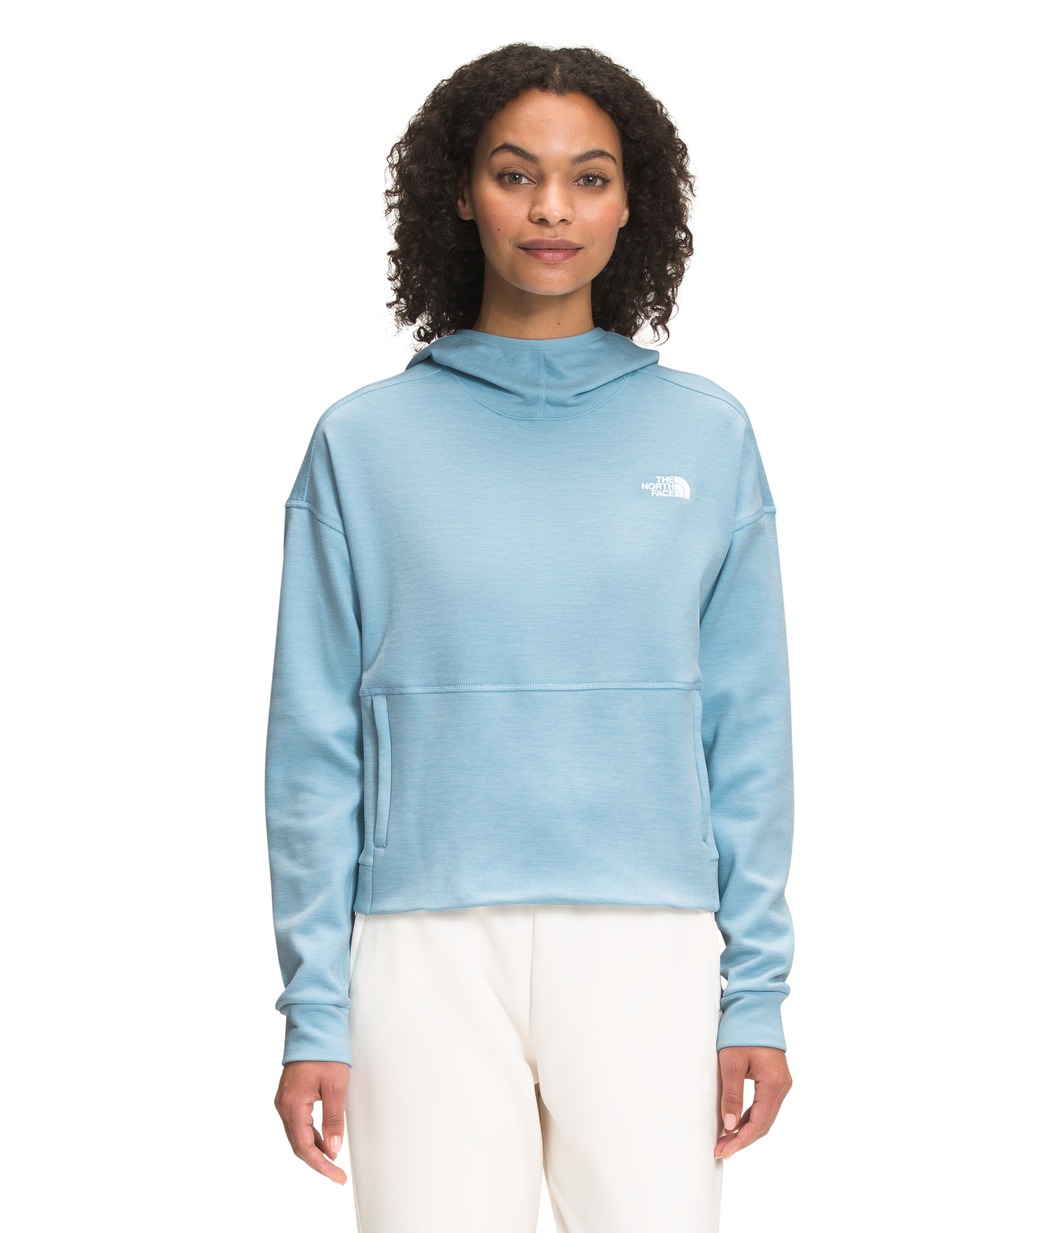 'The North Face' Women's Canyonlands Pullover Crop - Beta Blue Heather